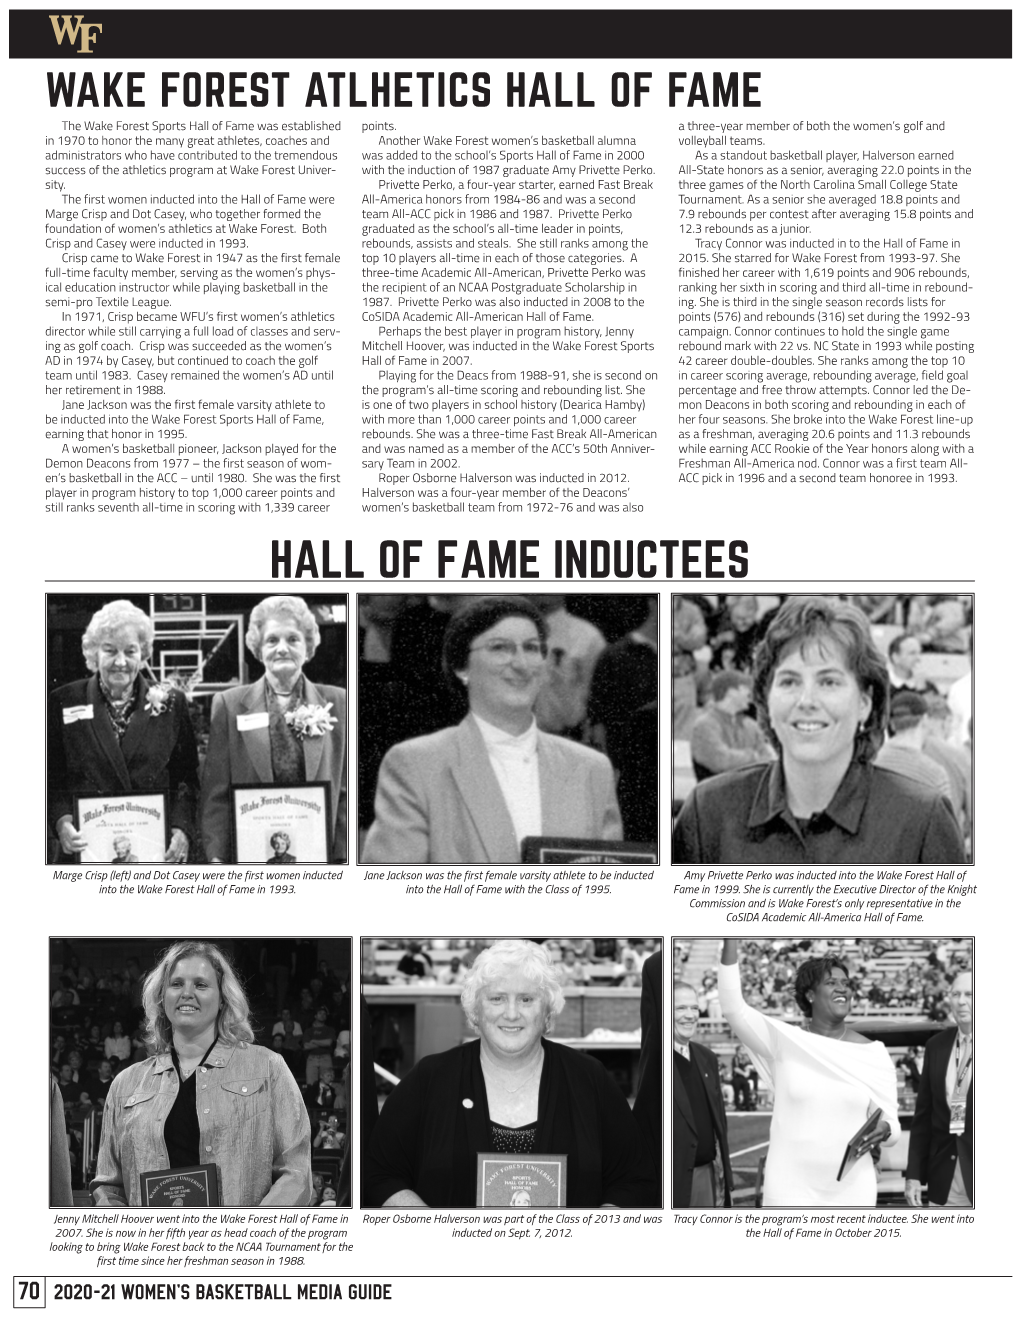 Hall of Fame Inductees